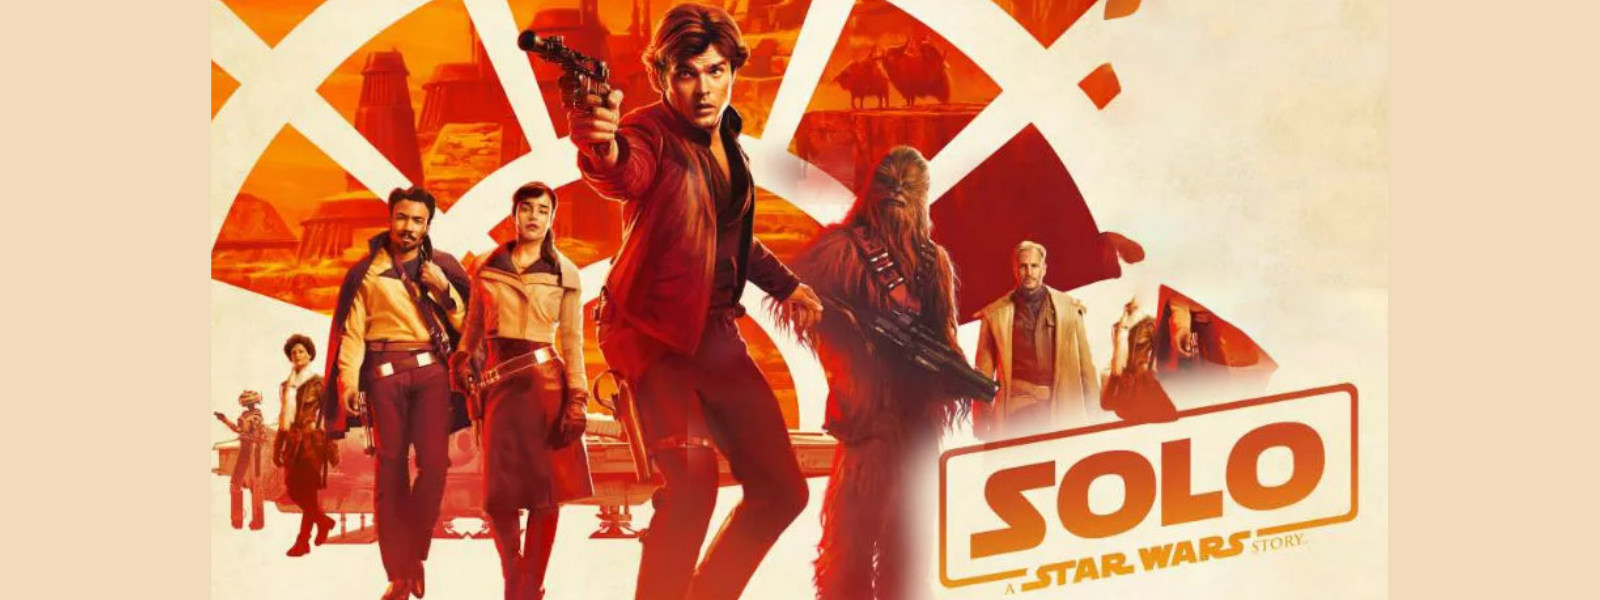 Solo: A Star Wars story dissapoints with $100M 